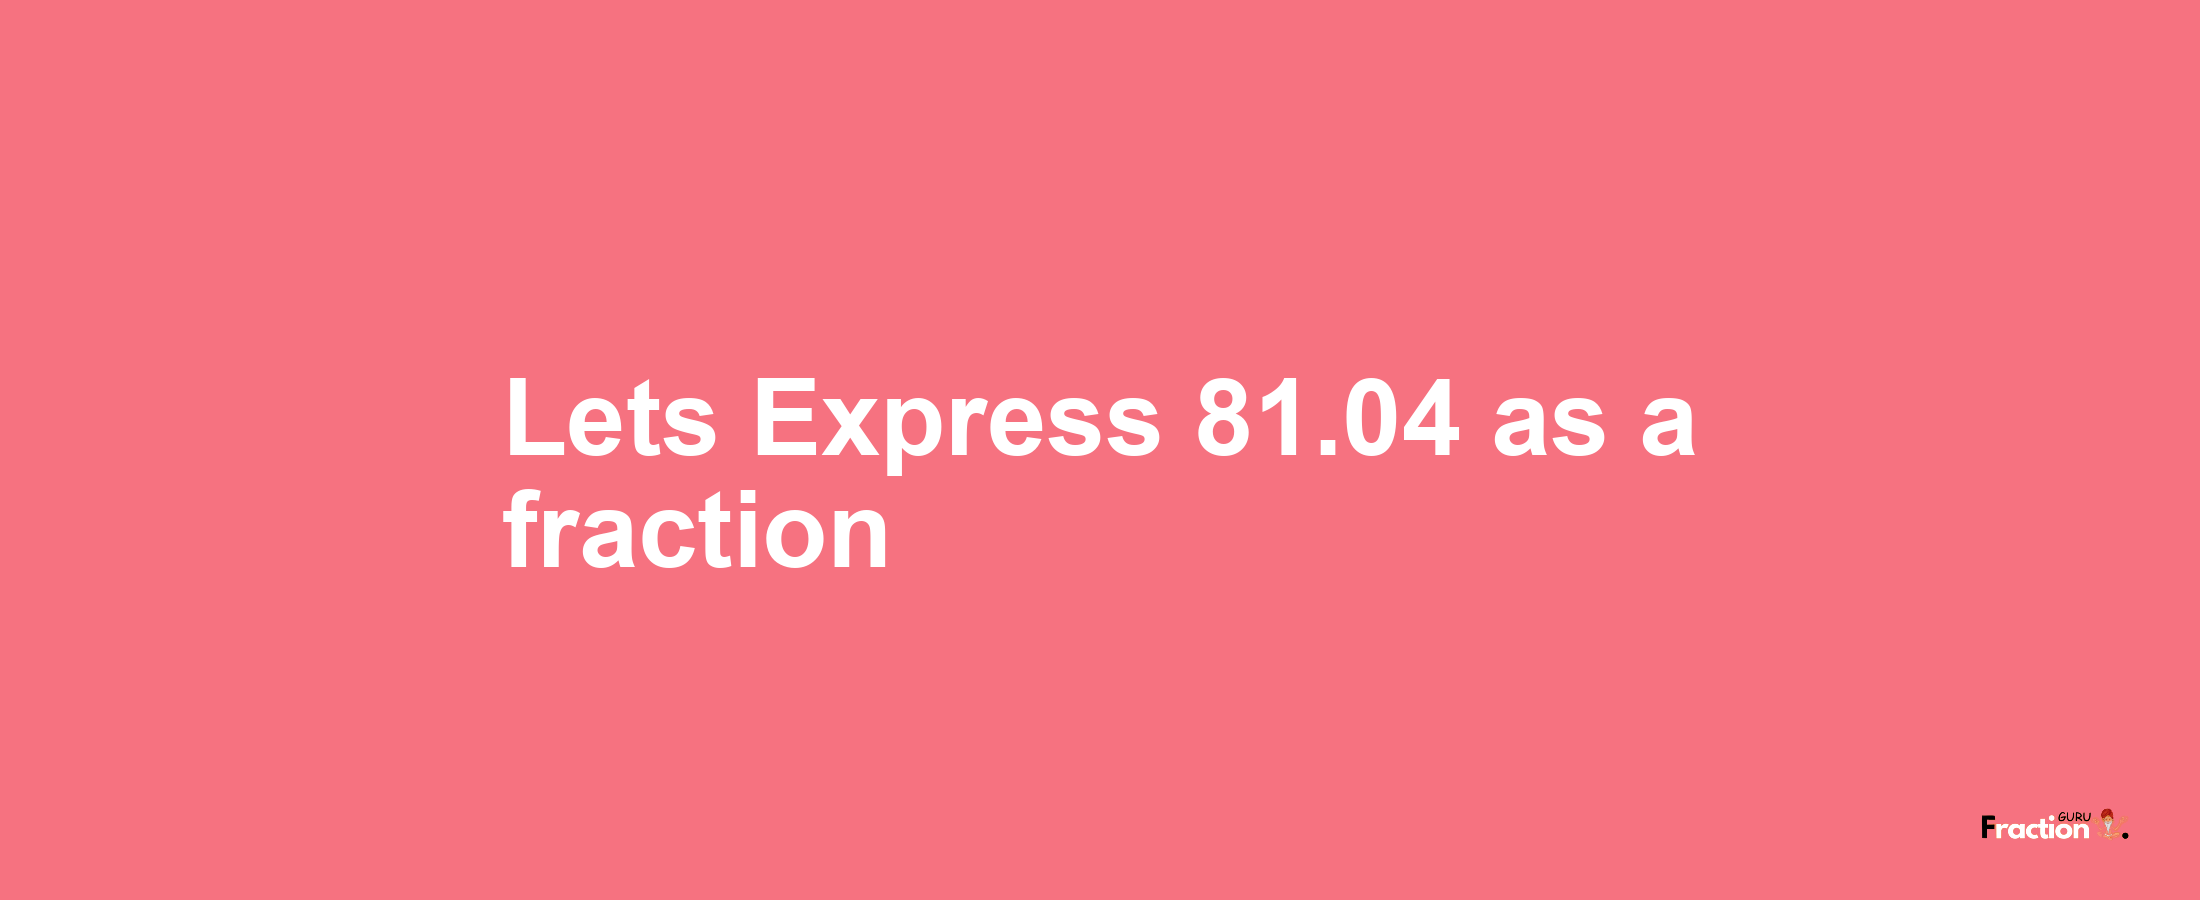 Lets Express 81.04 as afraction